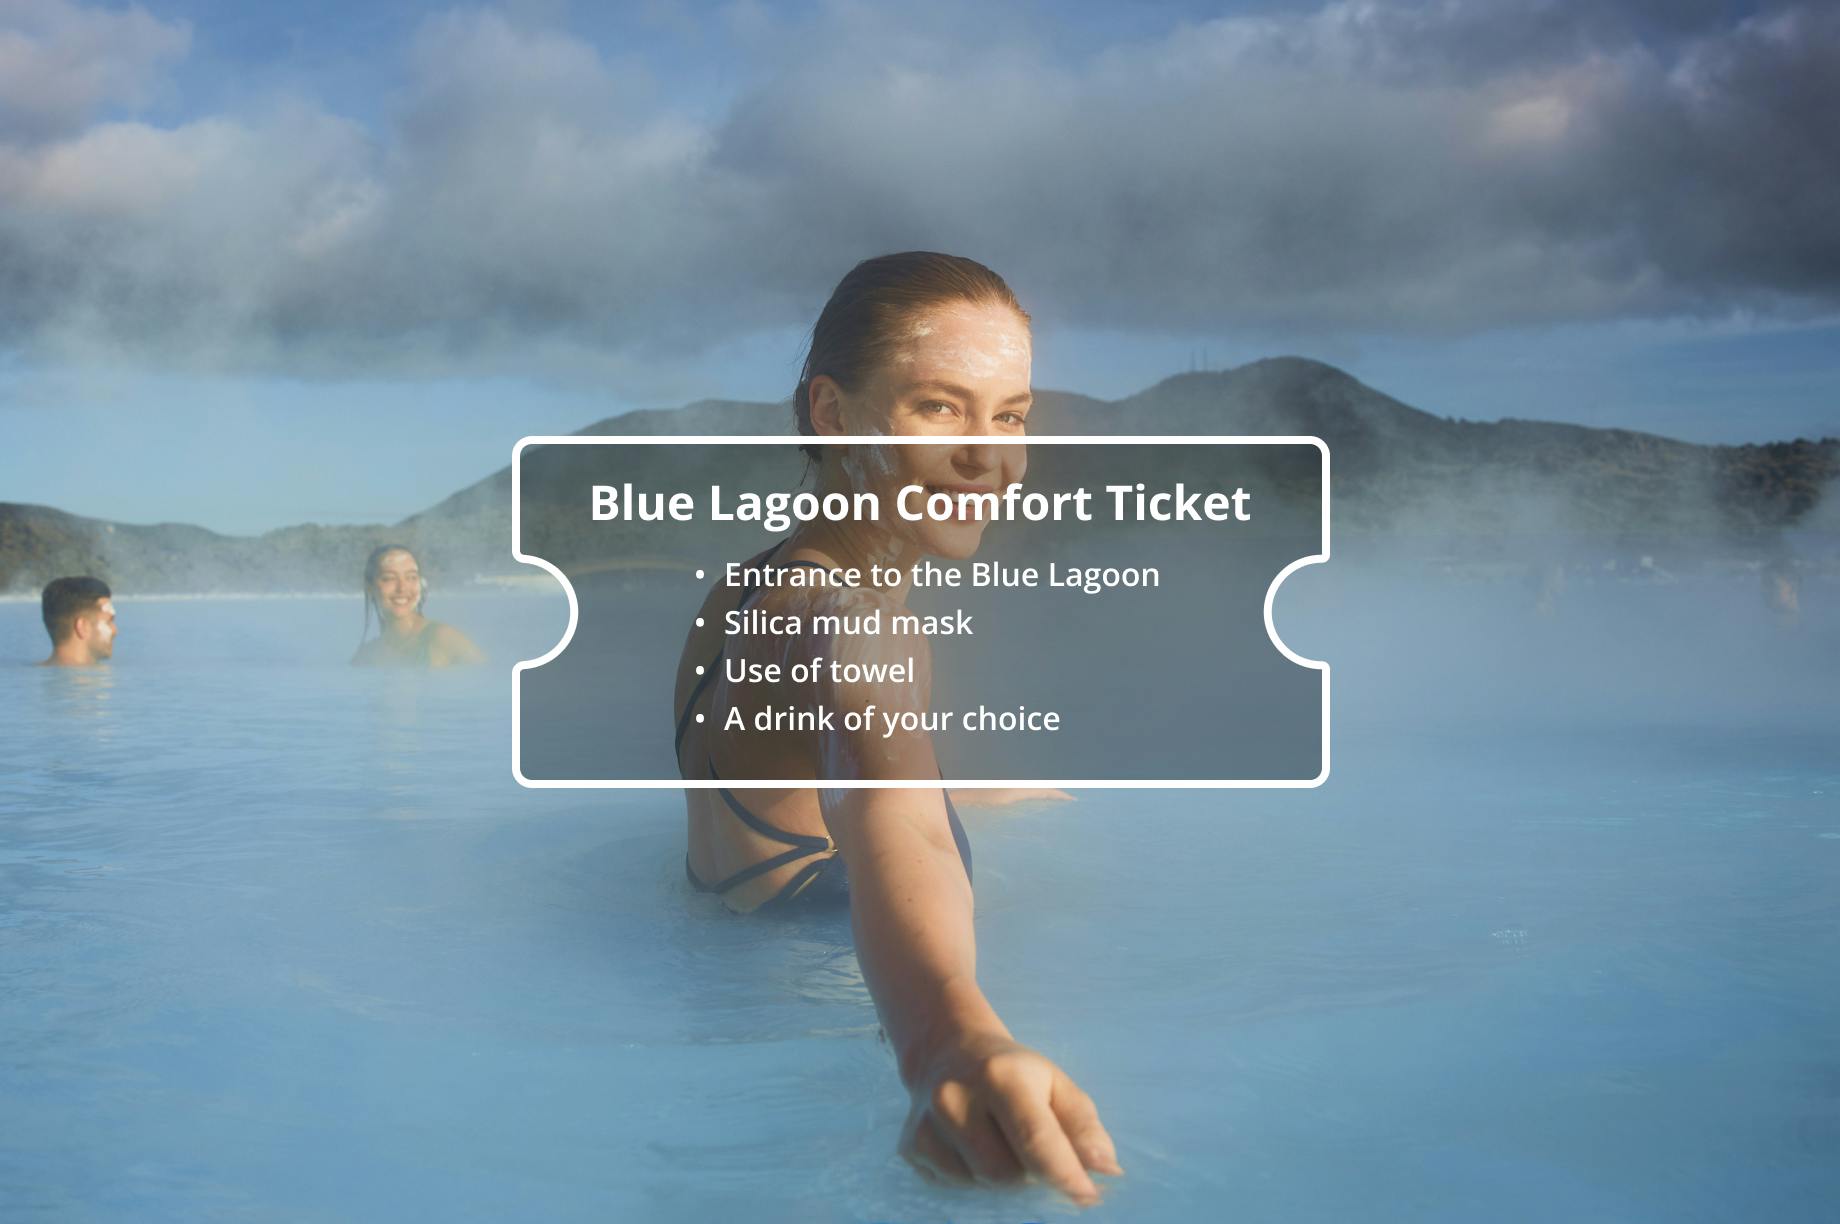 The Blue Lagoon Comfort ticket is the standard admission package to Iceland's Blue Lagoon, where you get silica mud mask and a drink of your choice.